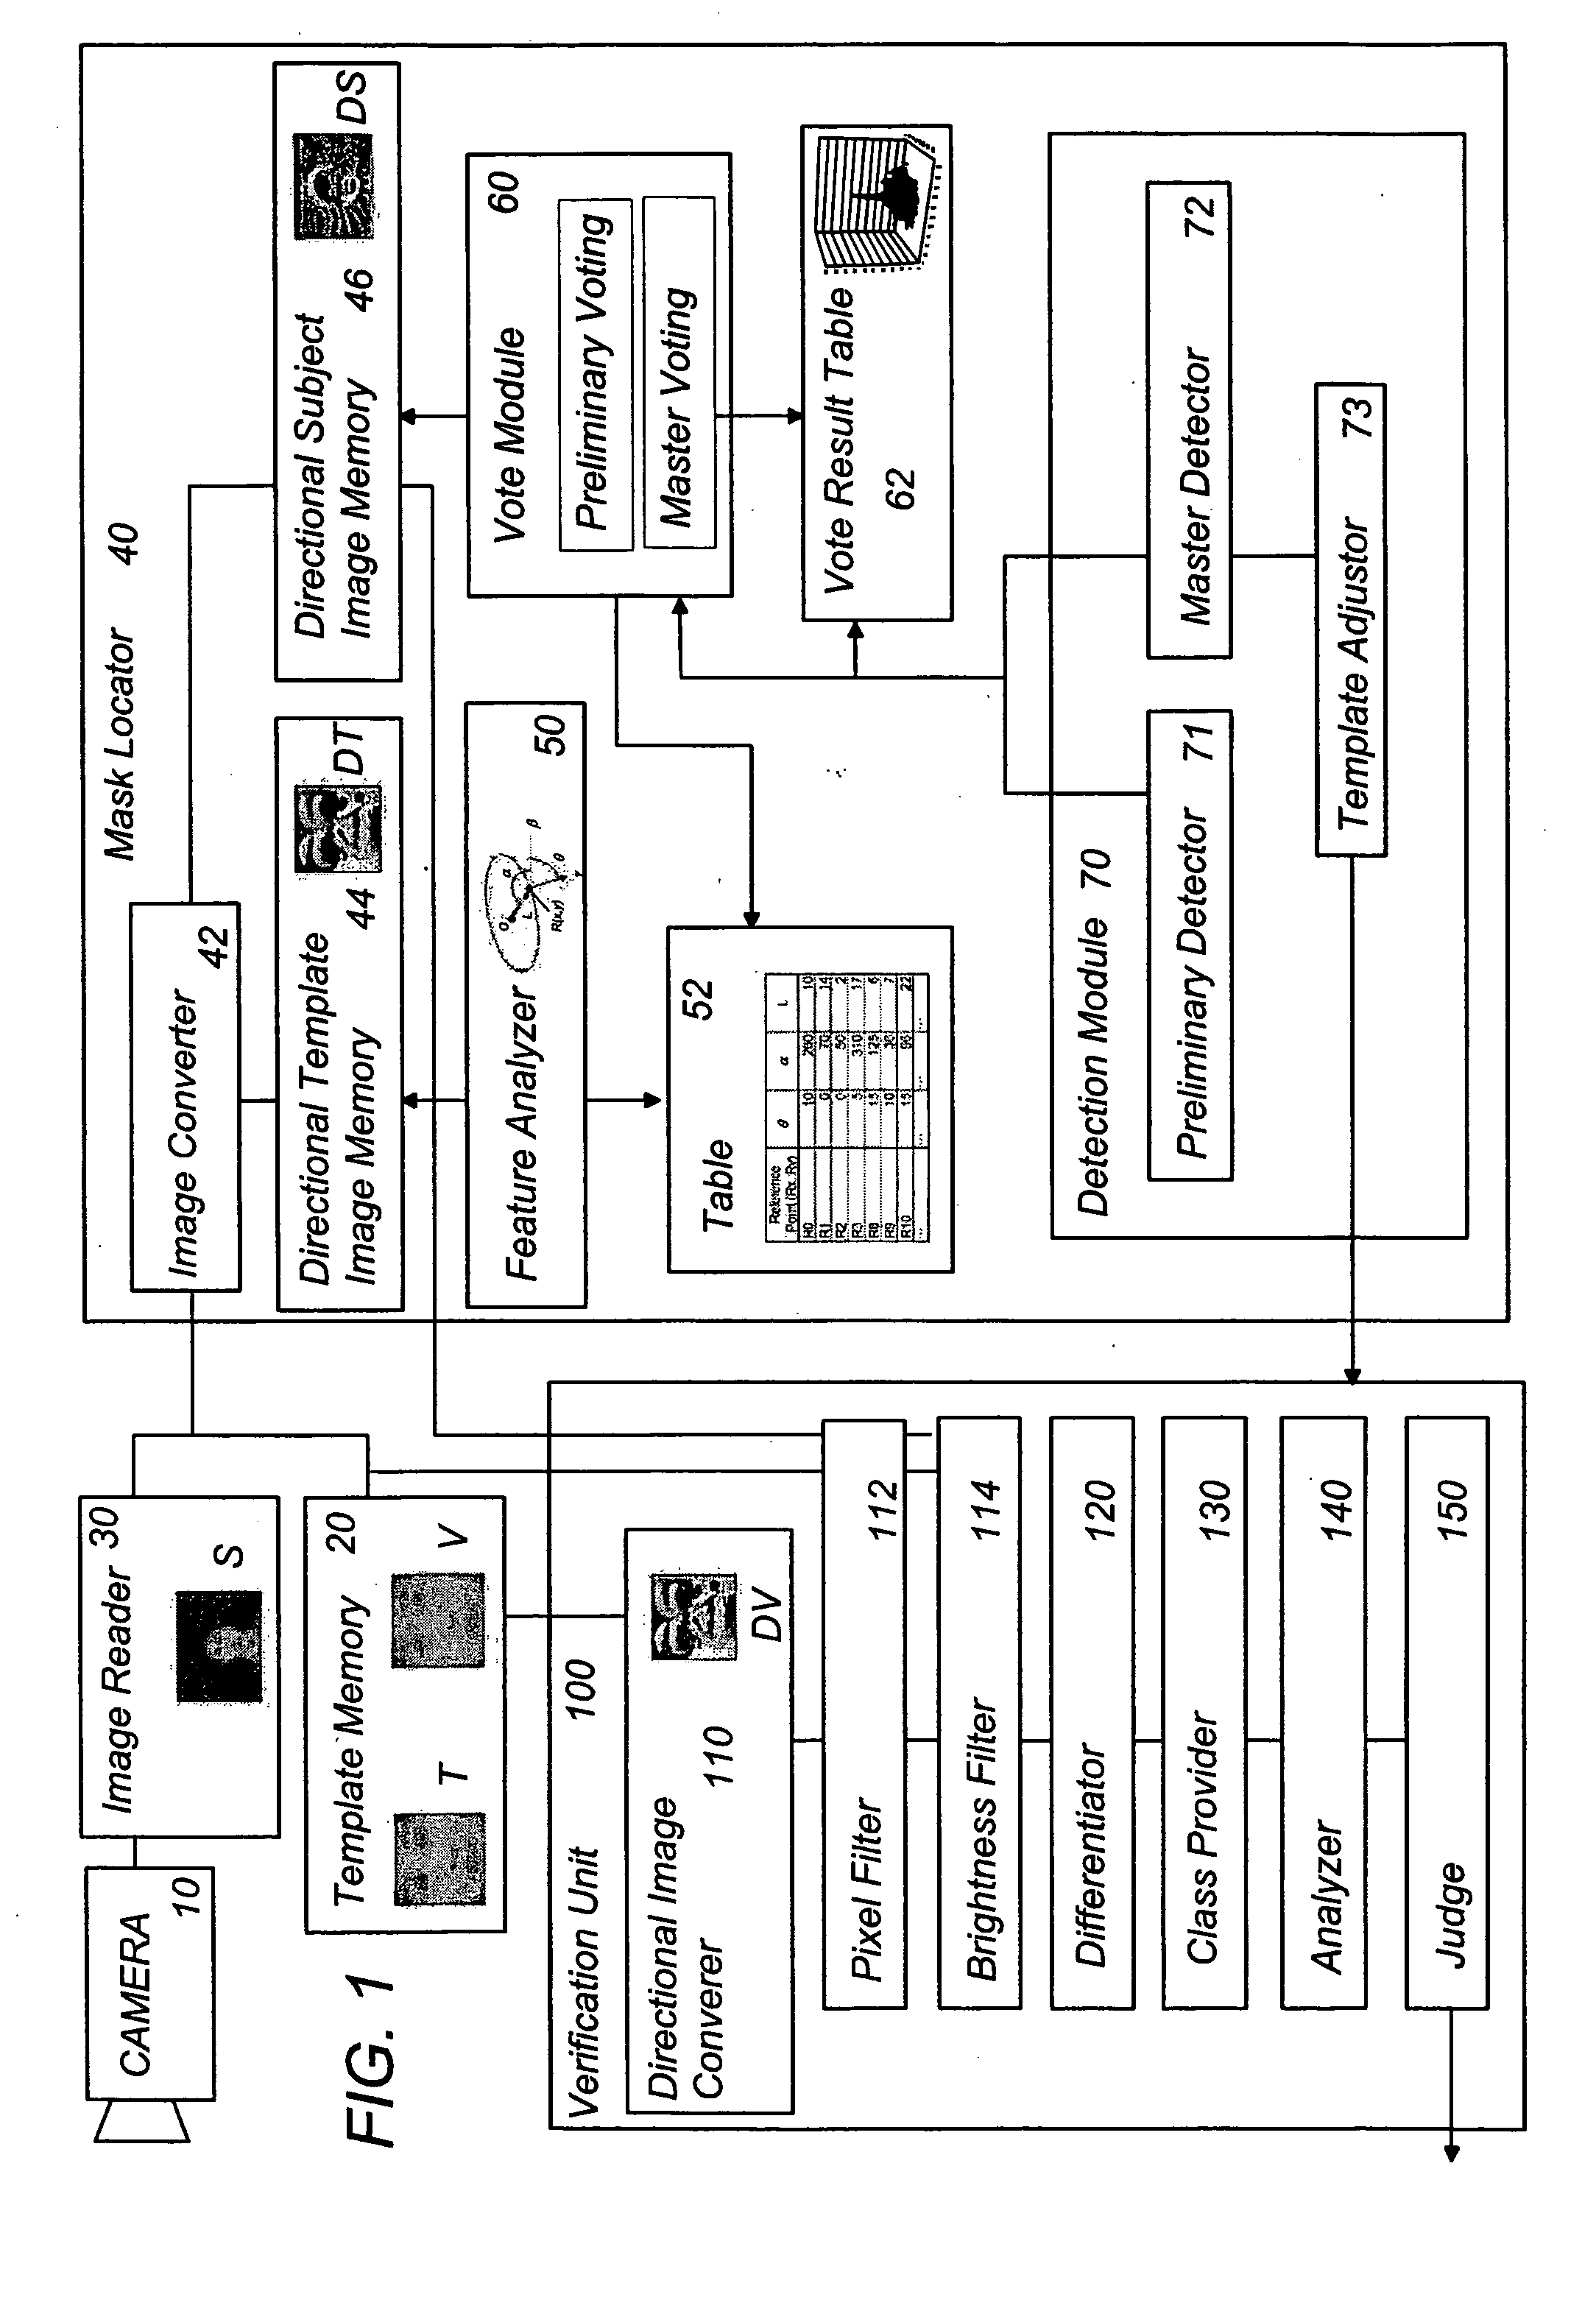 Object recognition system